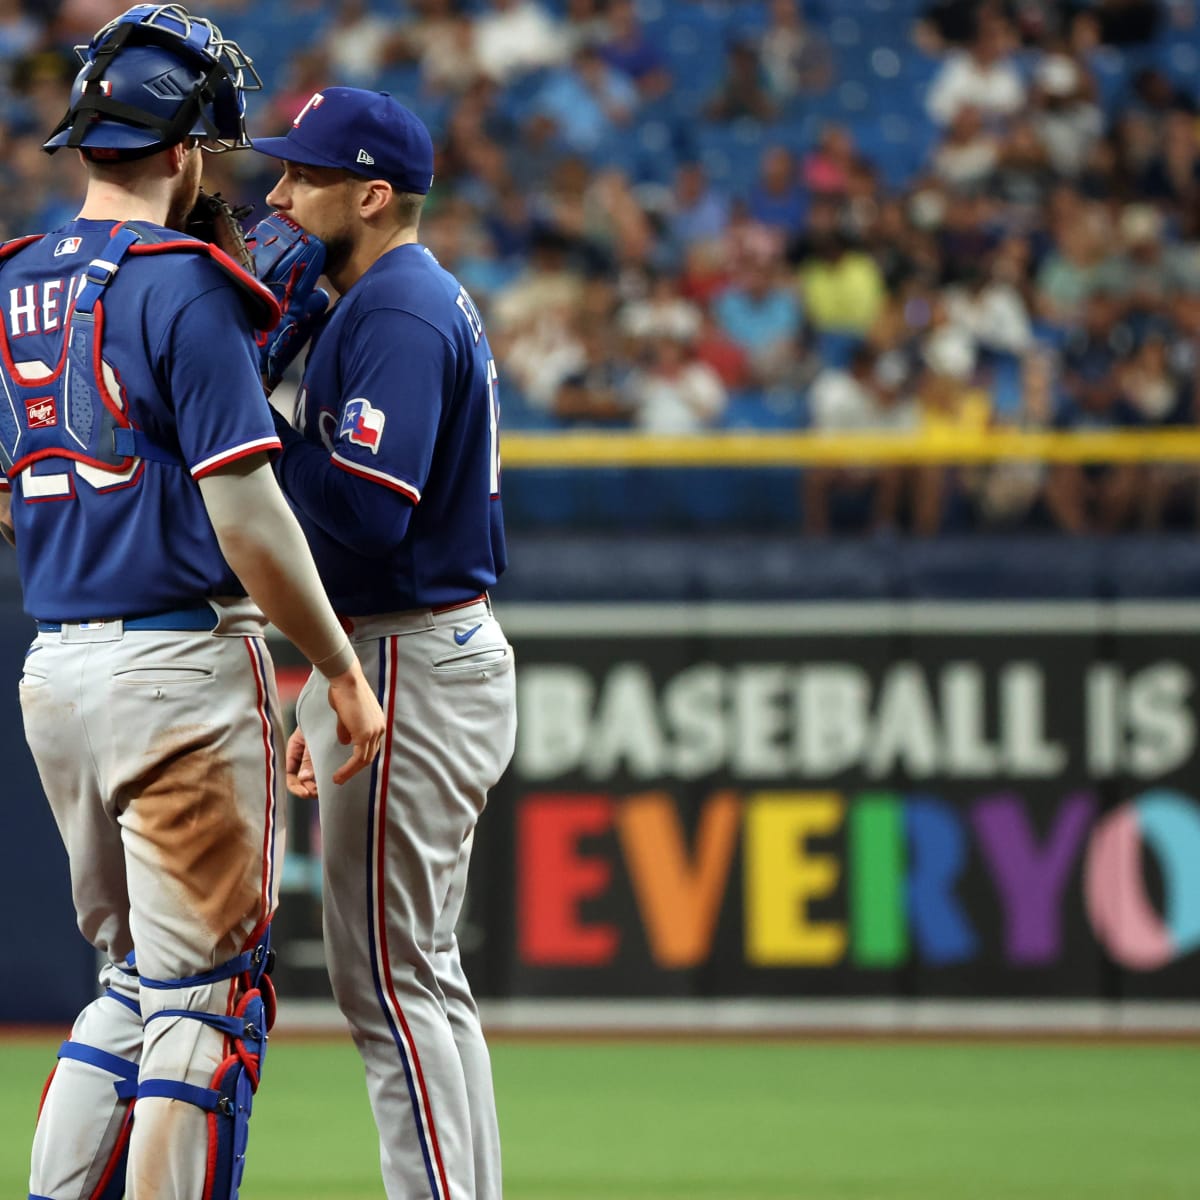 Texas Rangers Criticized For Not Hosting Pride Night - Sports